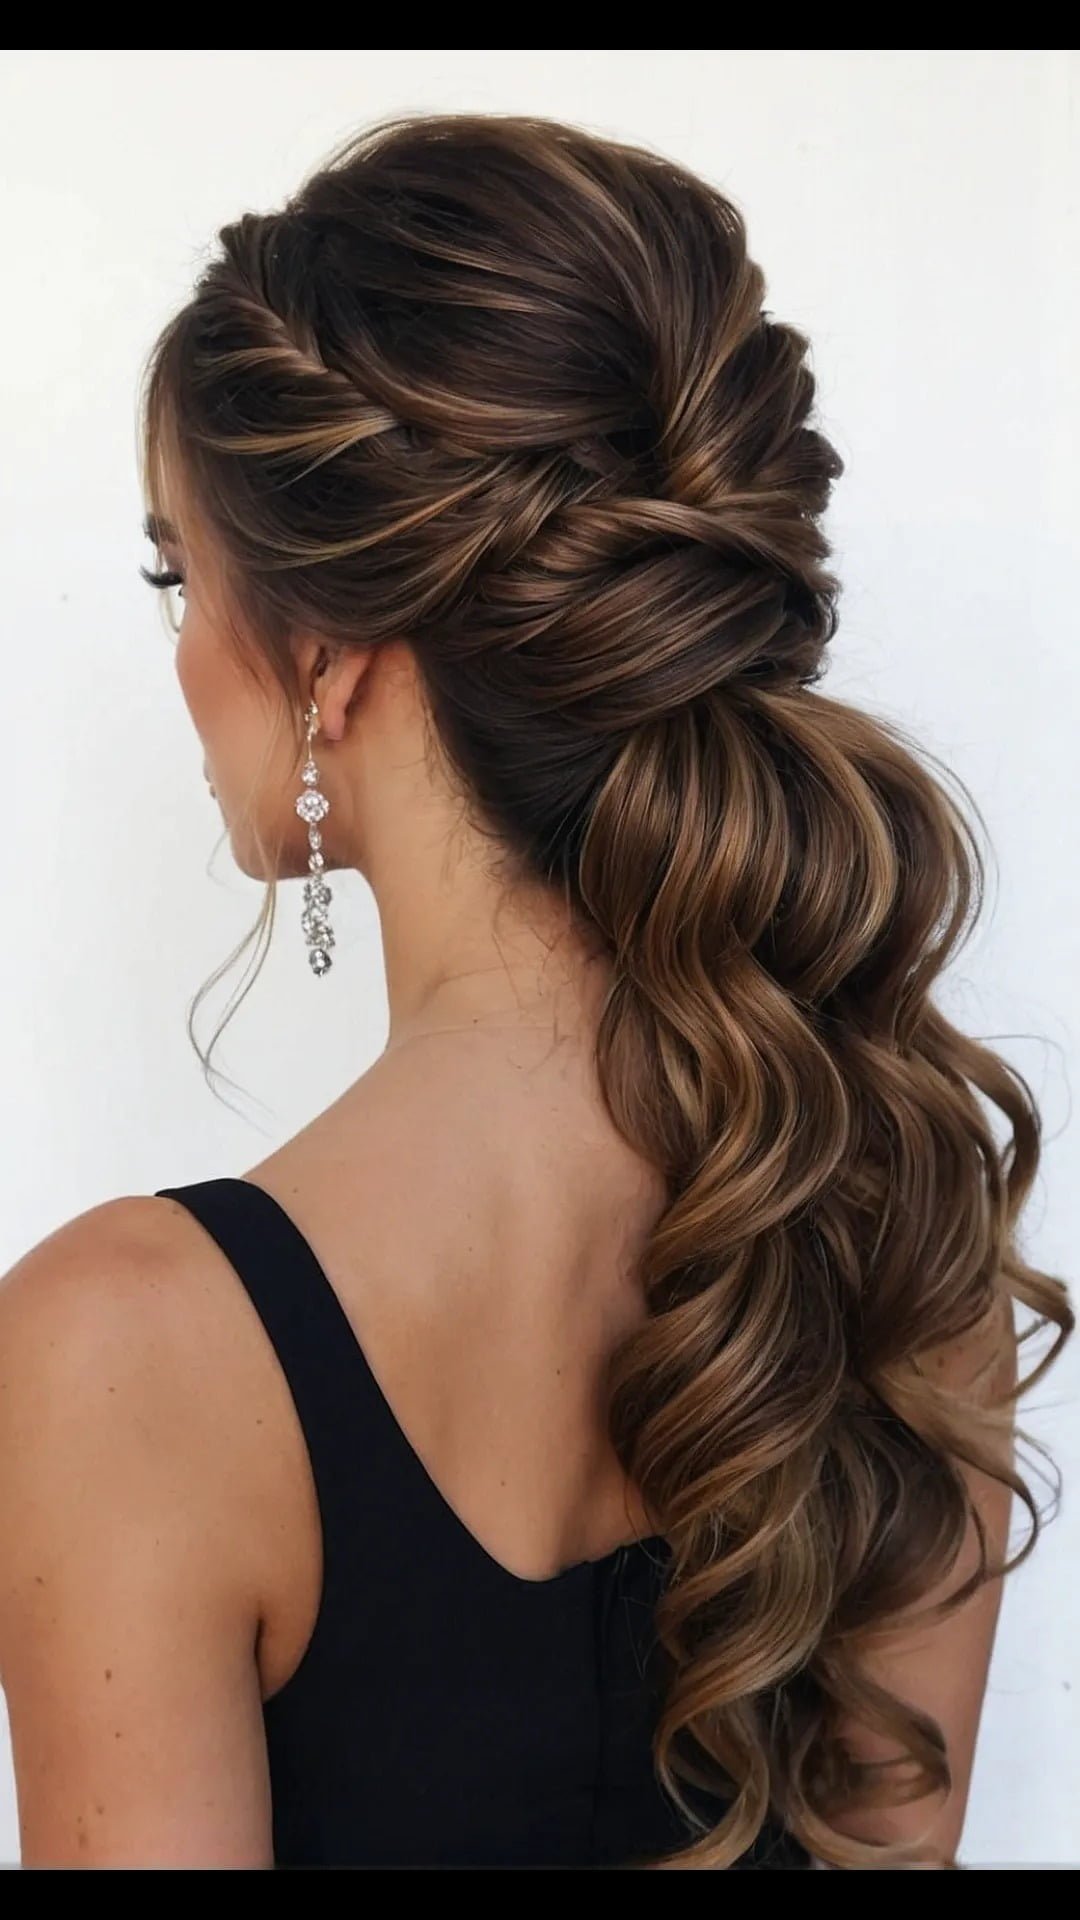 Luxurious Side-Swept Curls with Braided Elegance